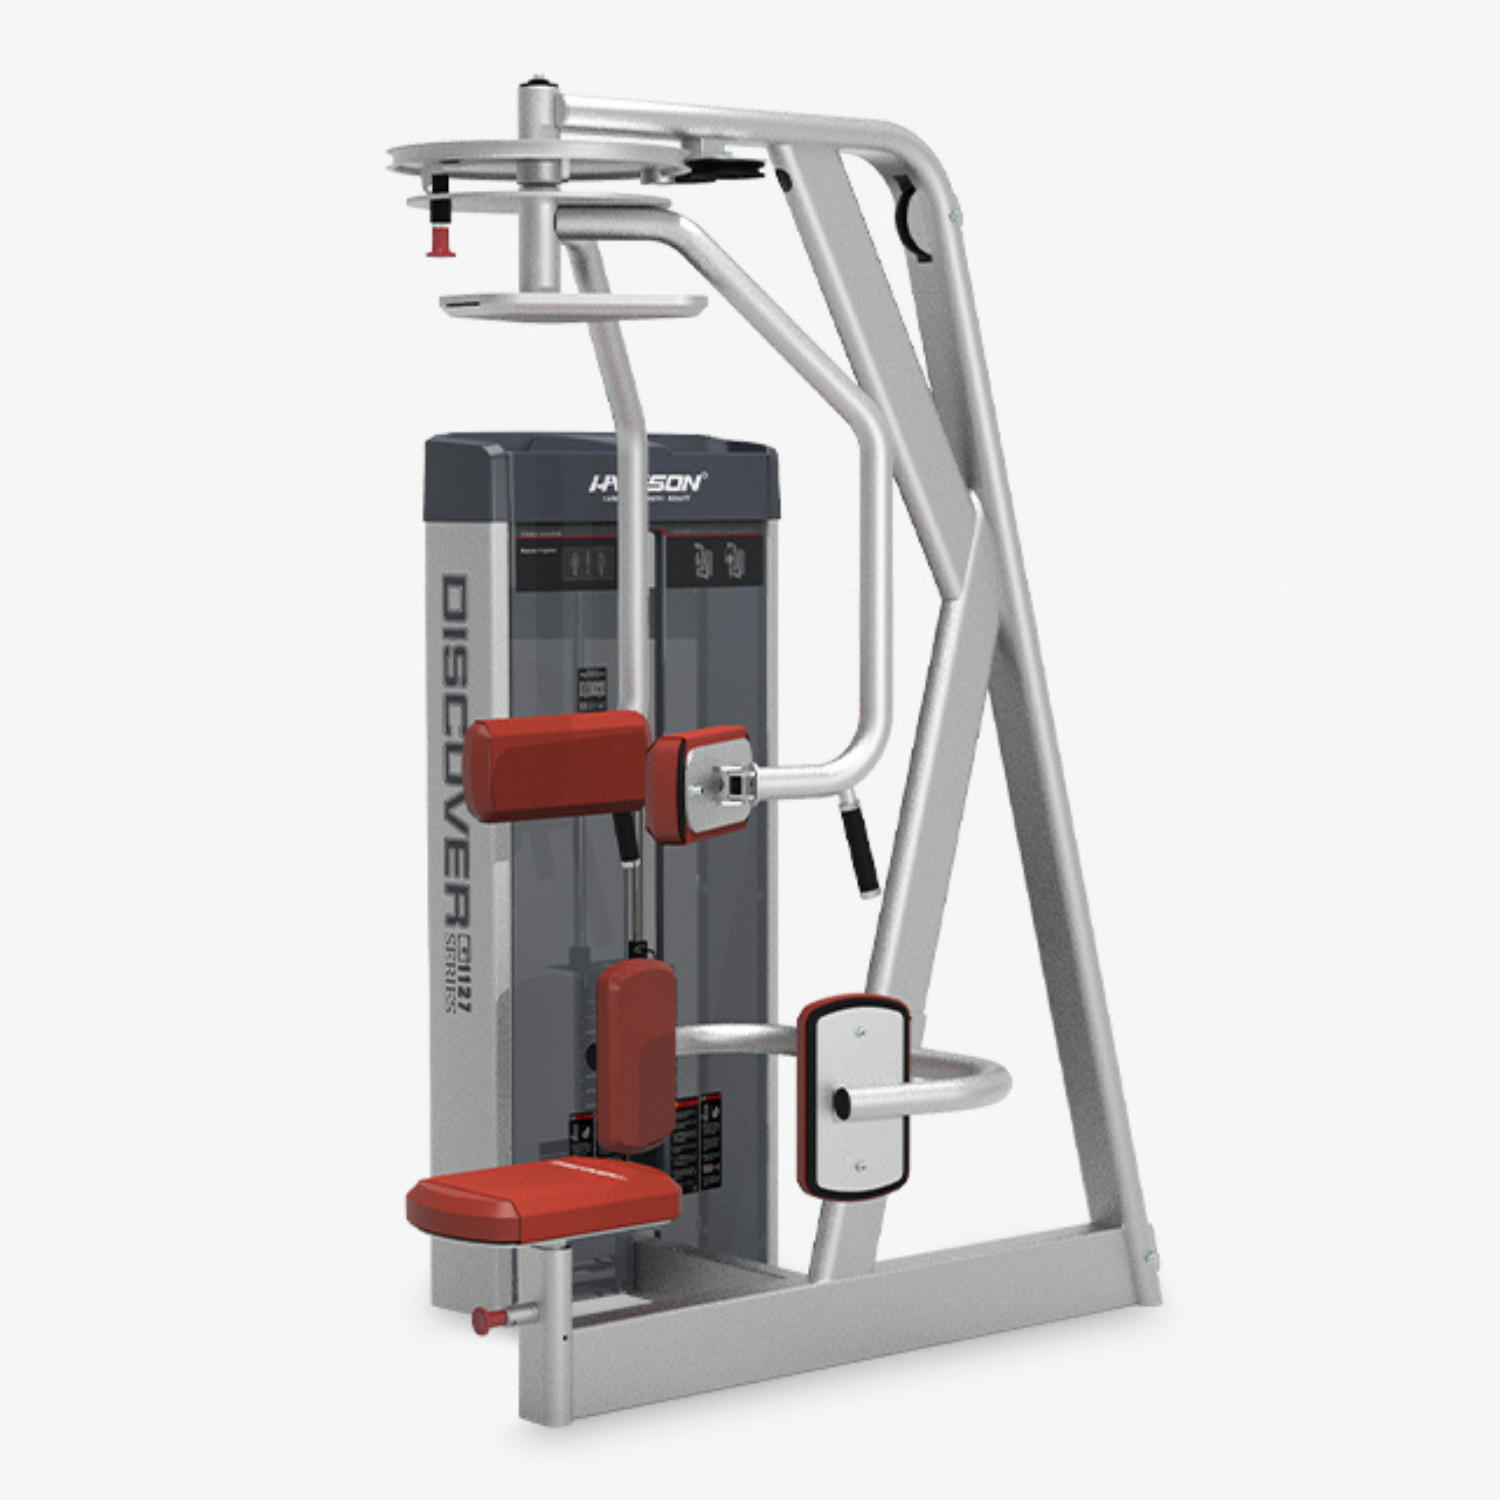 -Commercial Rotary Waist-Gym Direct